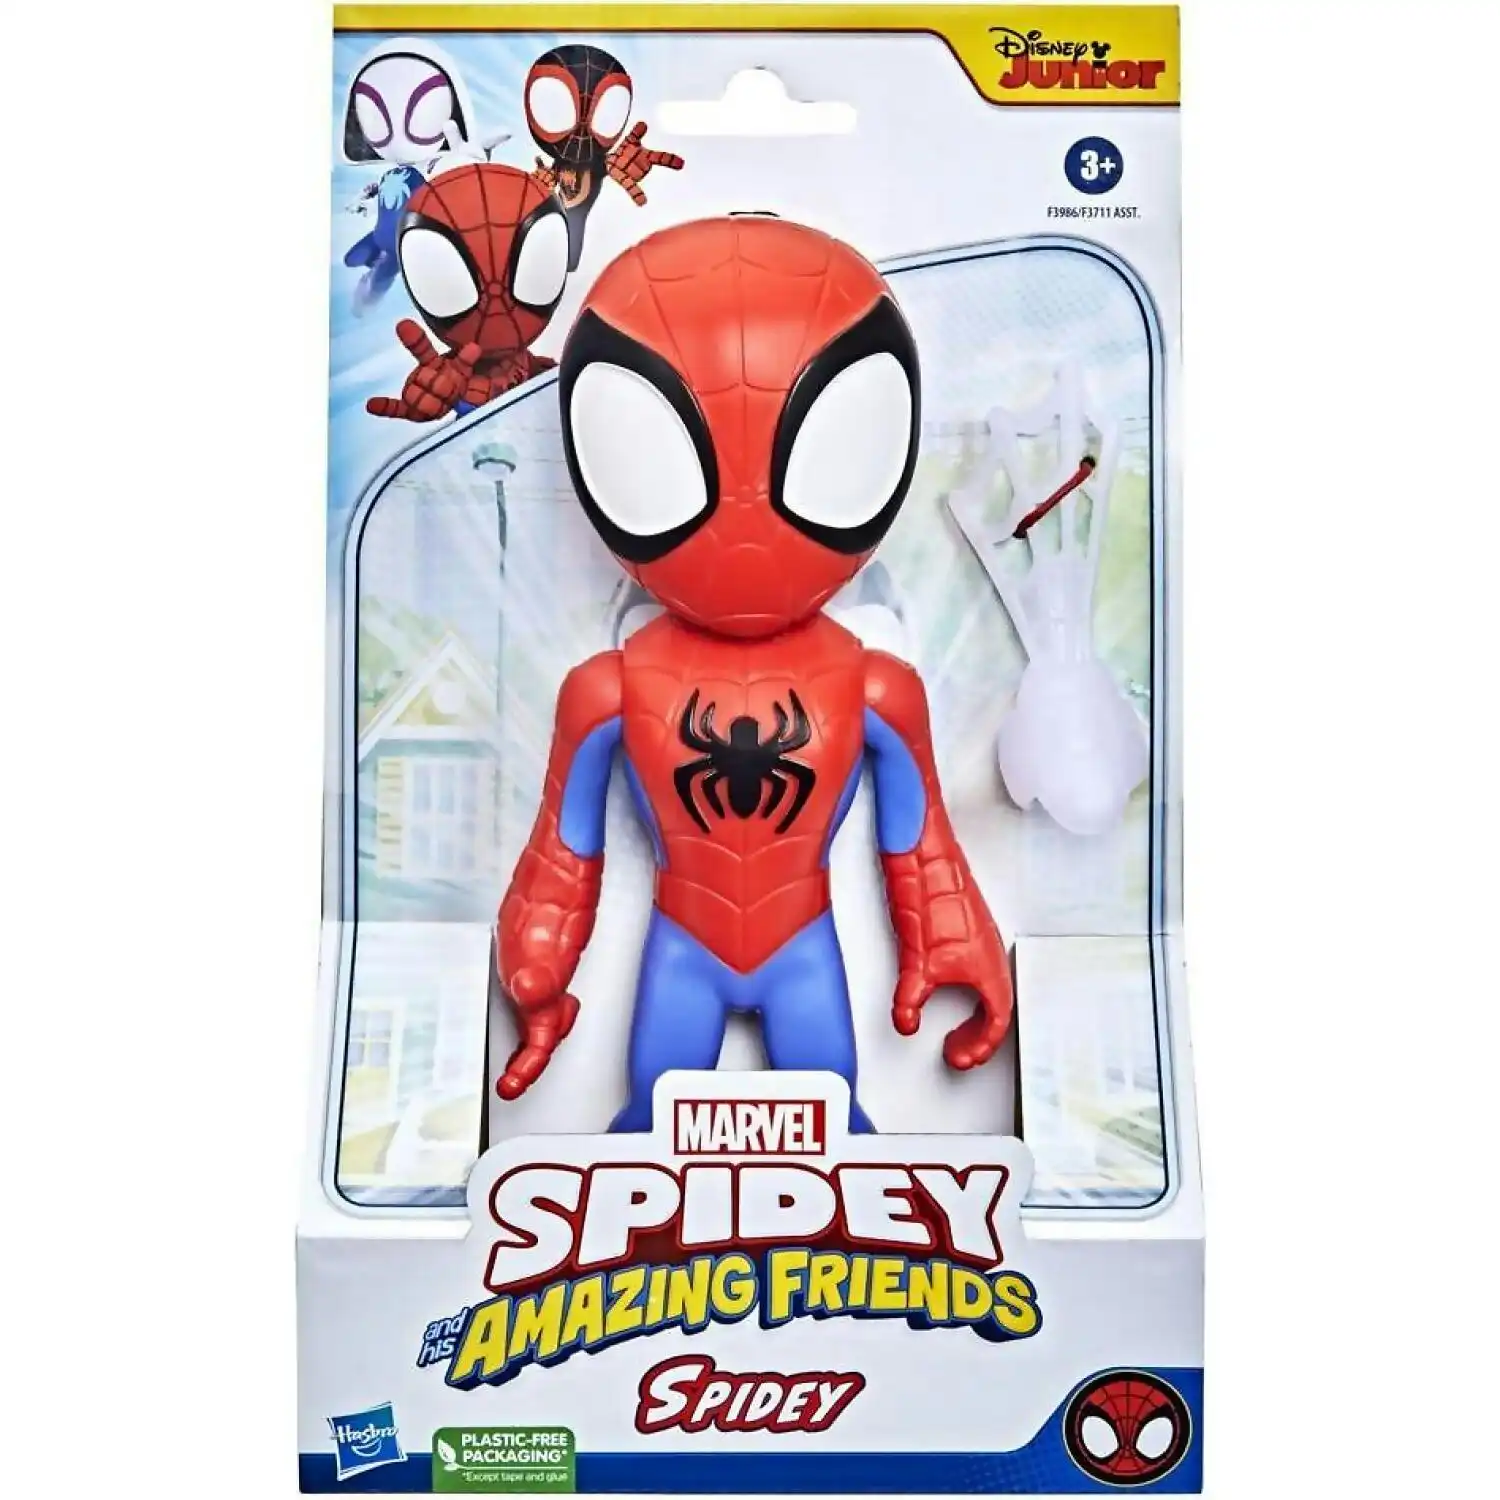 Marvel - Spidey And His Amazing Friends Supersized Spidey Action Figure - Hasbro